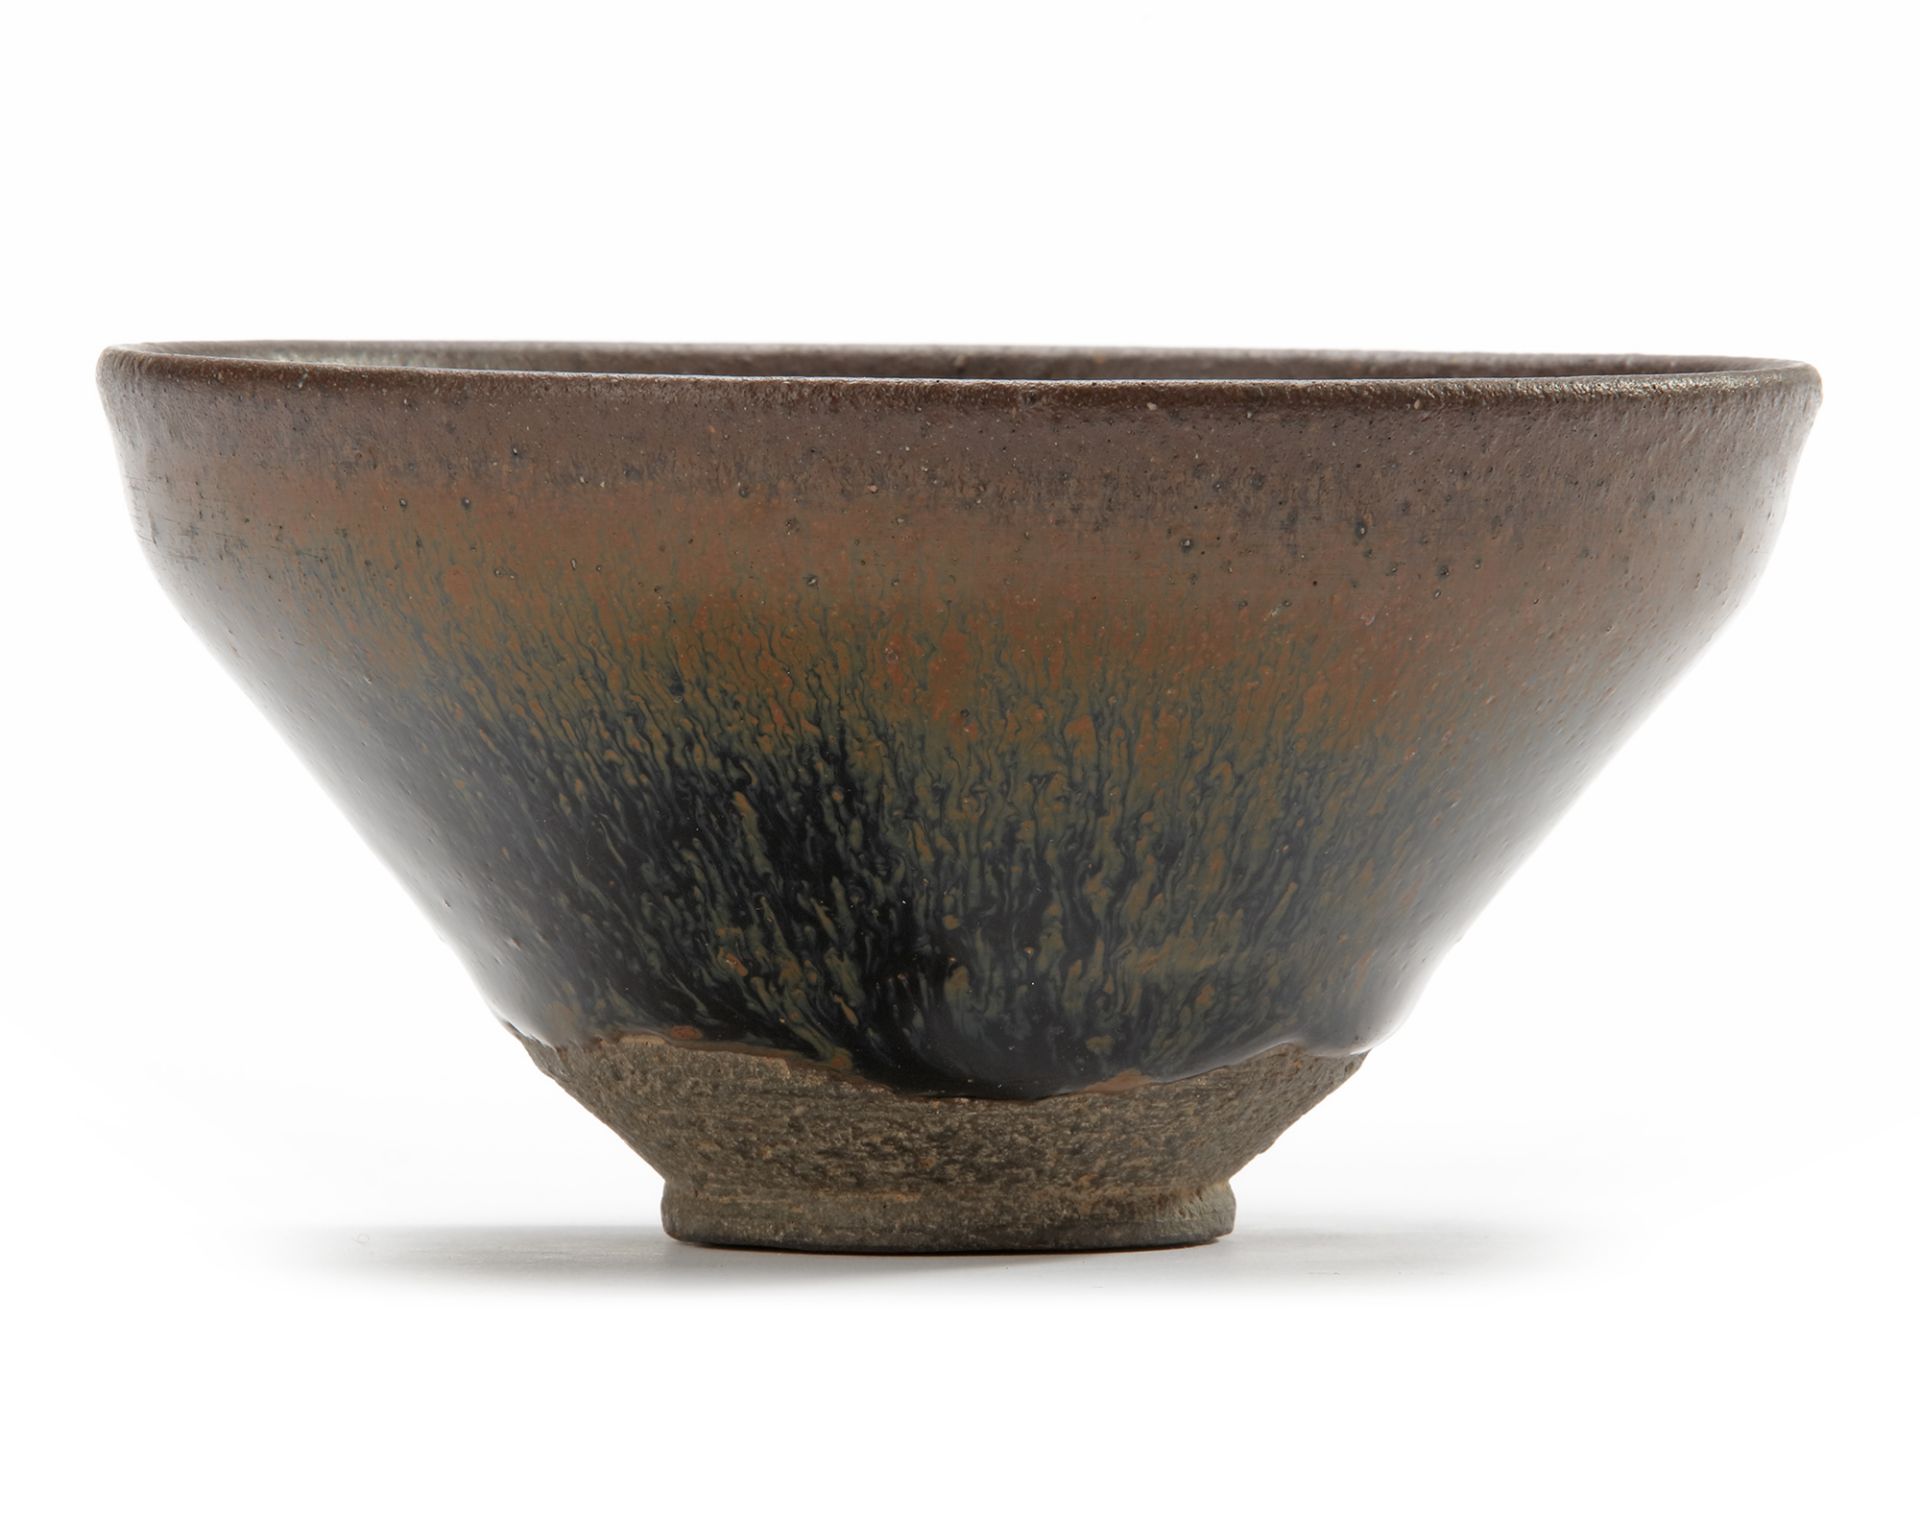 A CHINESE JIANYAO 'HARE'S FUR' TEA BOWL SOUTHERN SONG DYNASTY, 12TH-13TH CENTURY